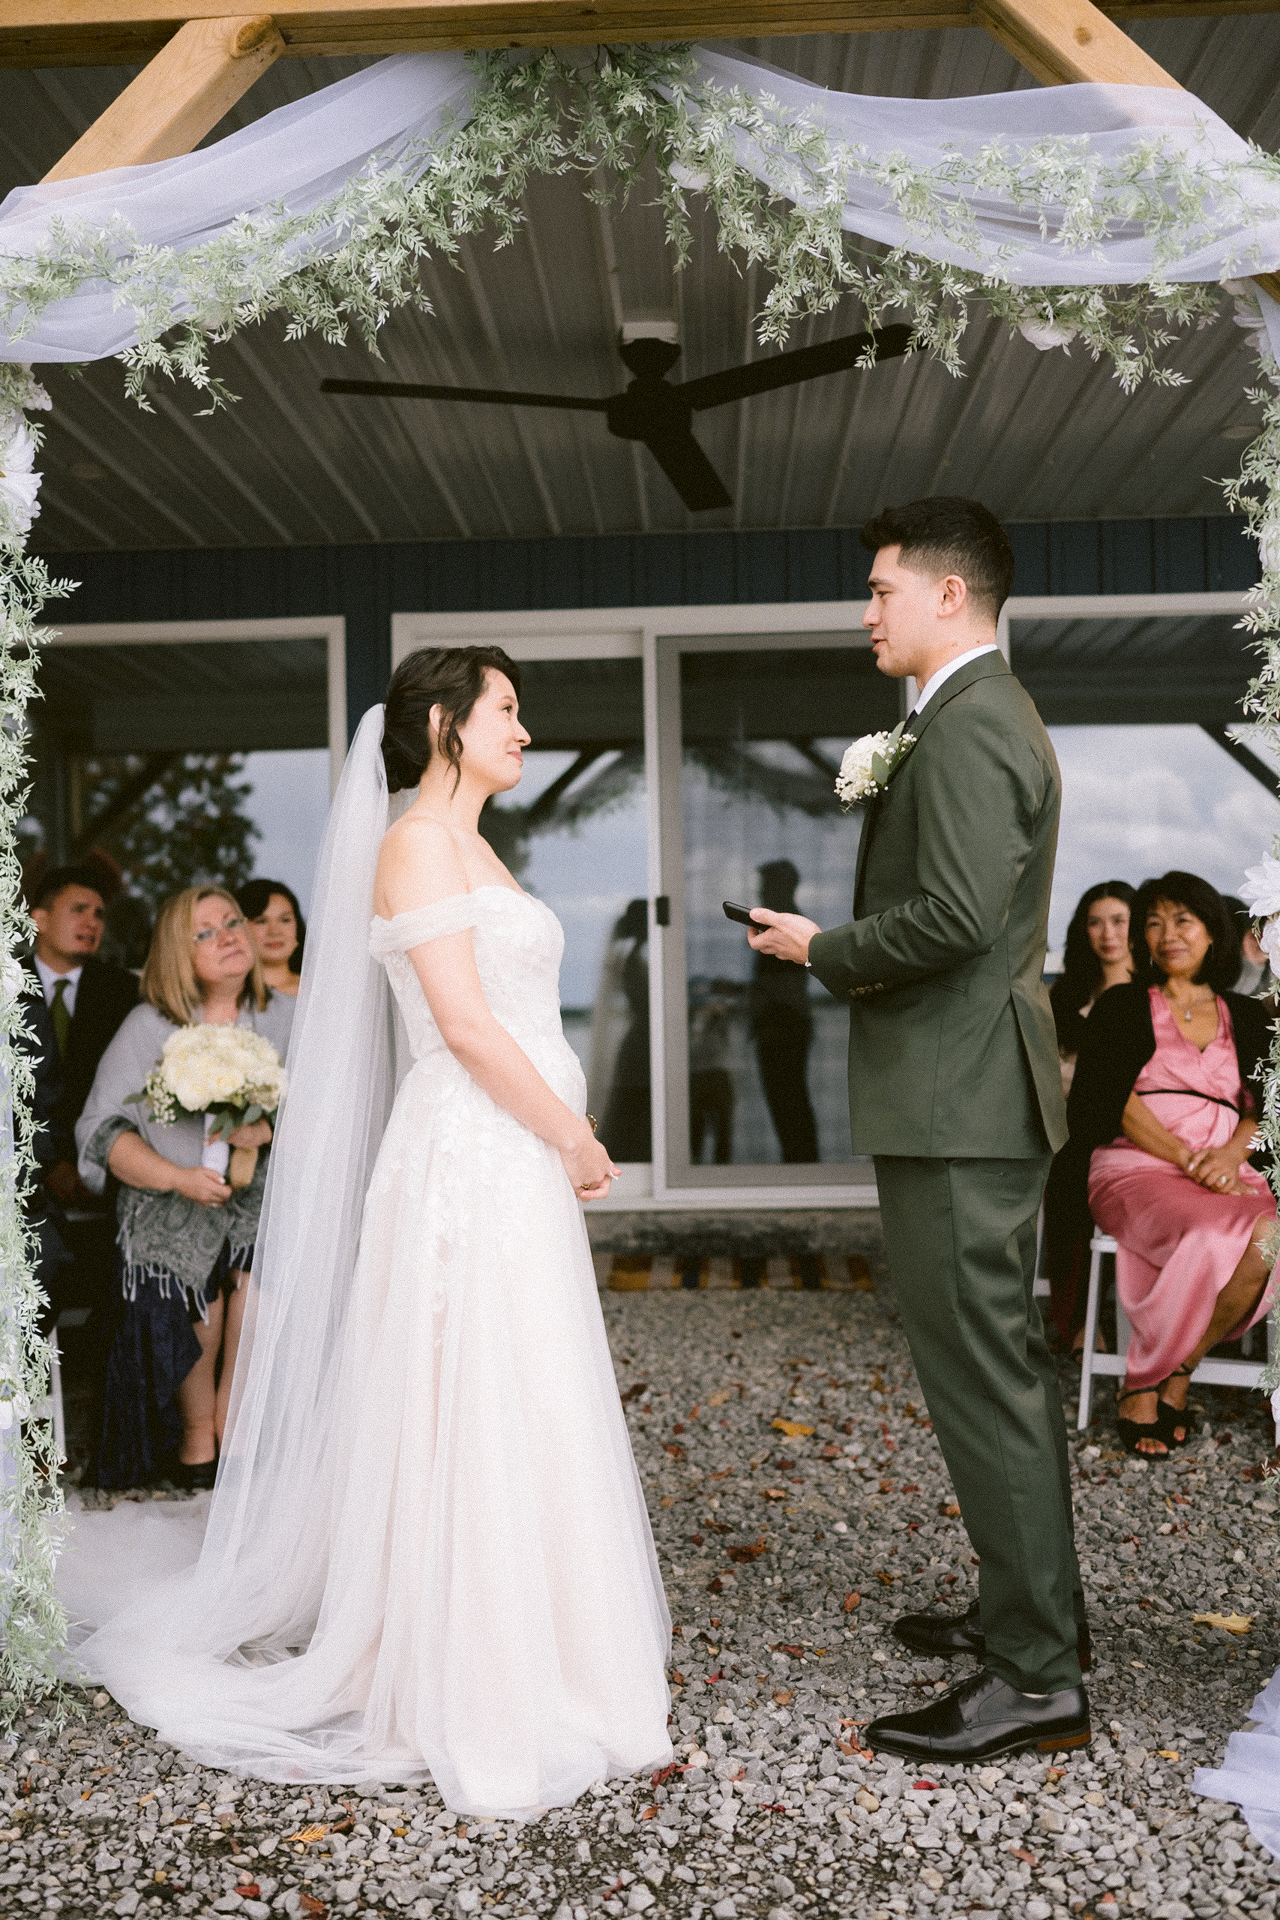 A couple exchanges vows at an outdoor wedding ceremony with guests looking on.